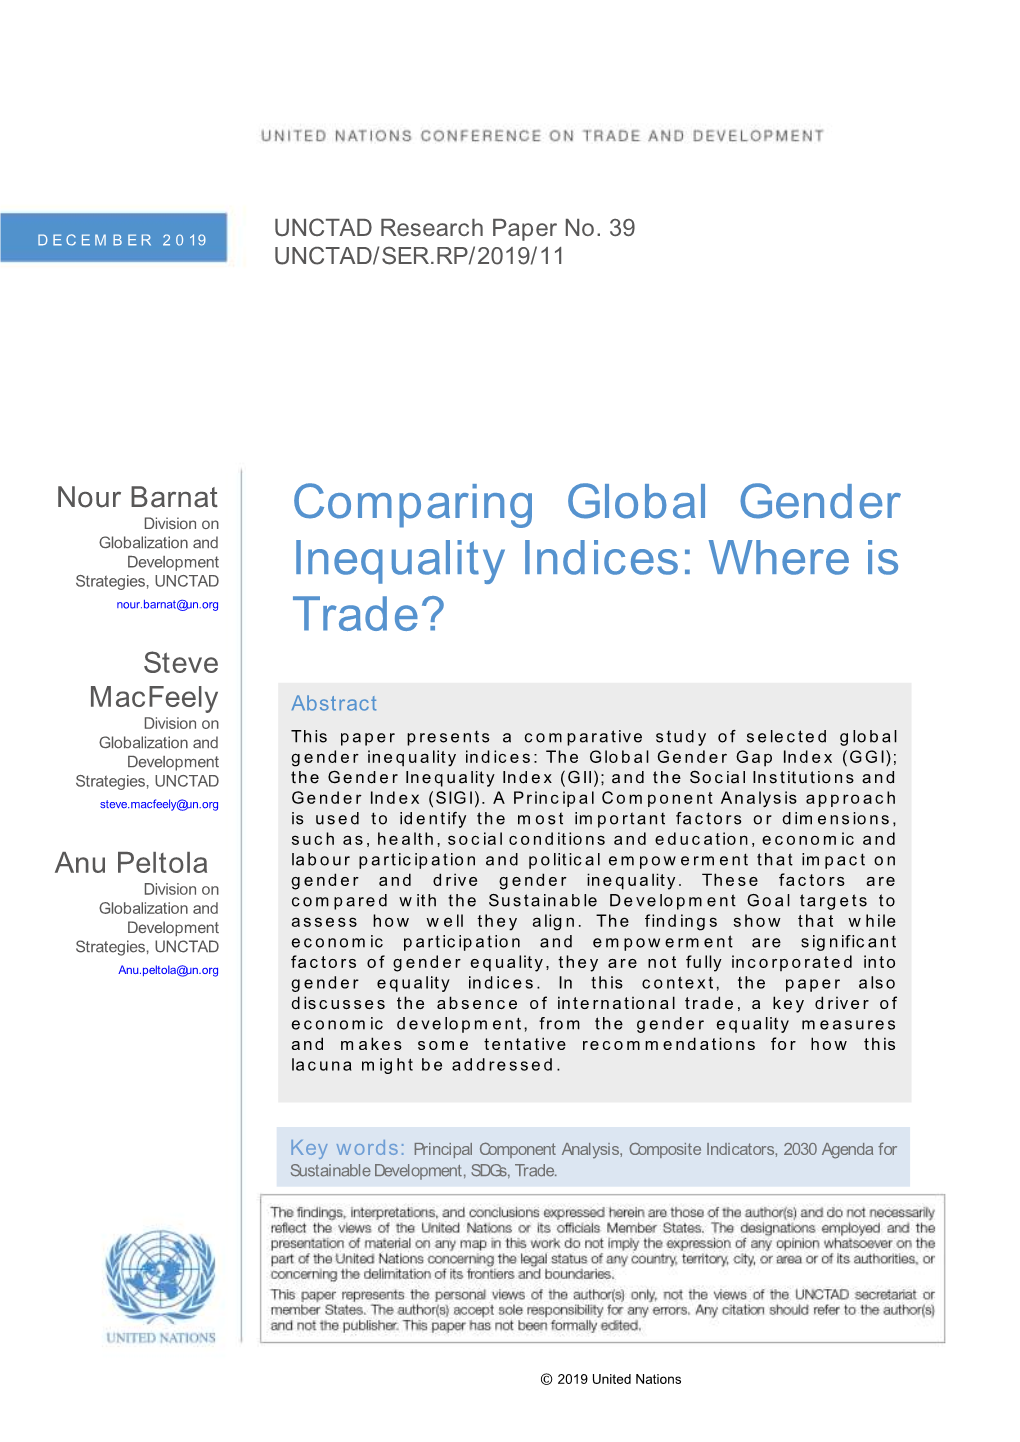 Comparing Global Gender Inequality Indices: Where Is Trade?